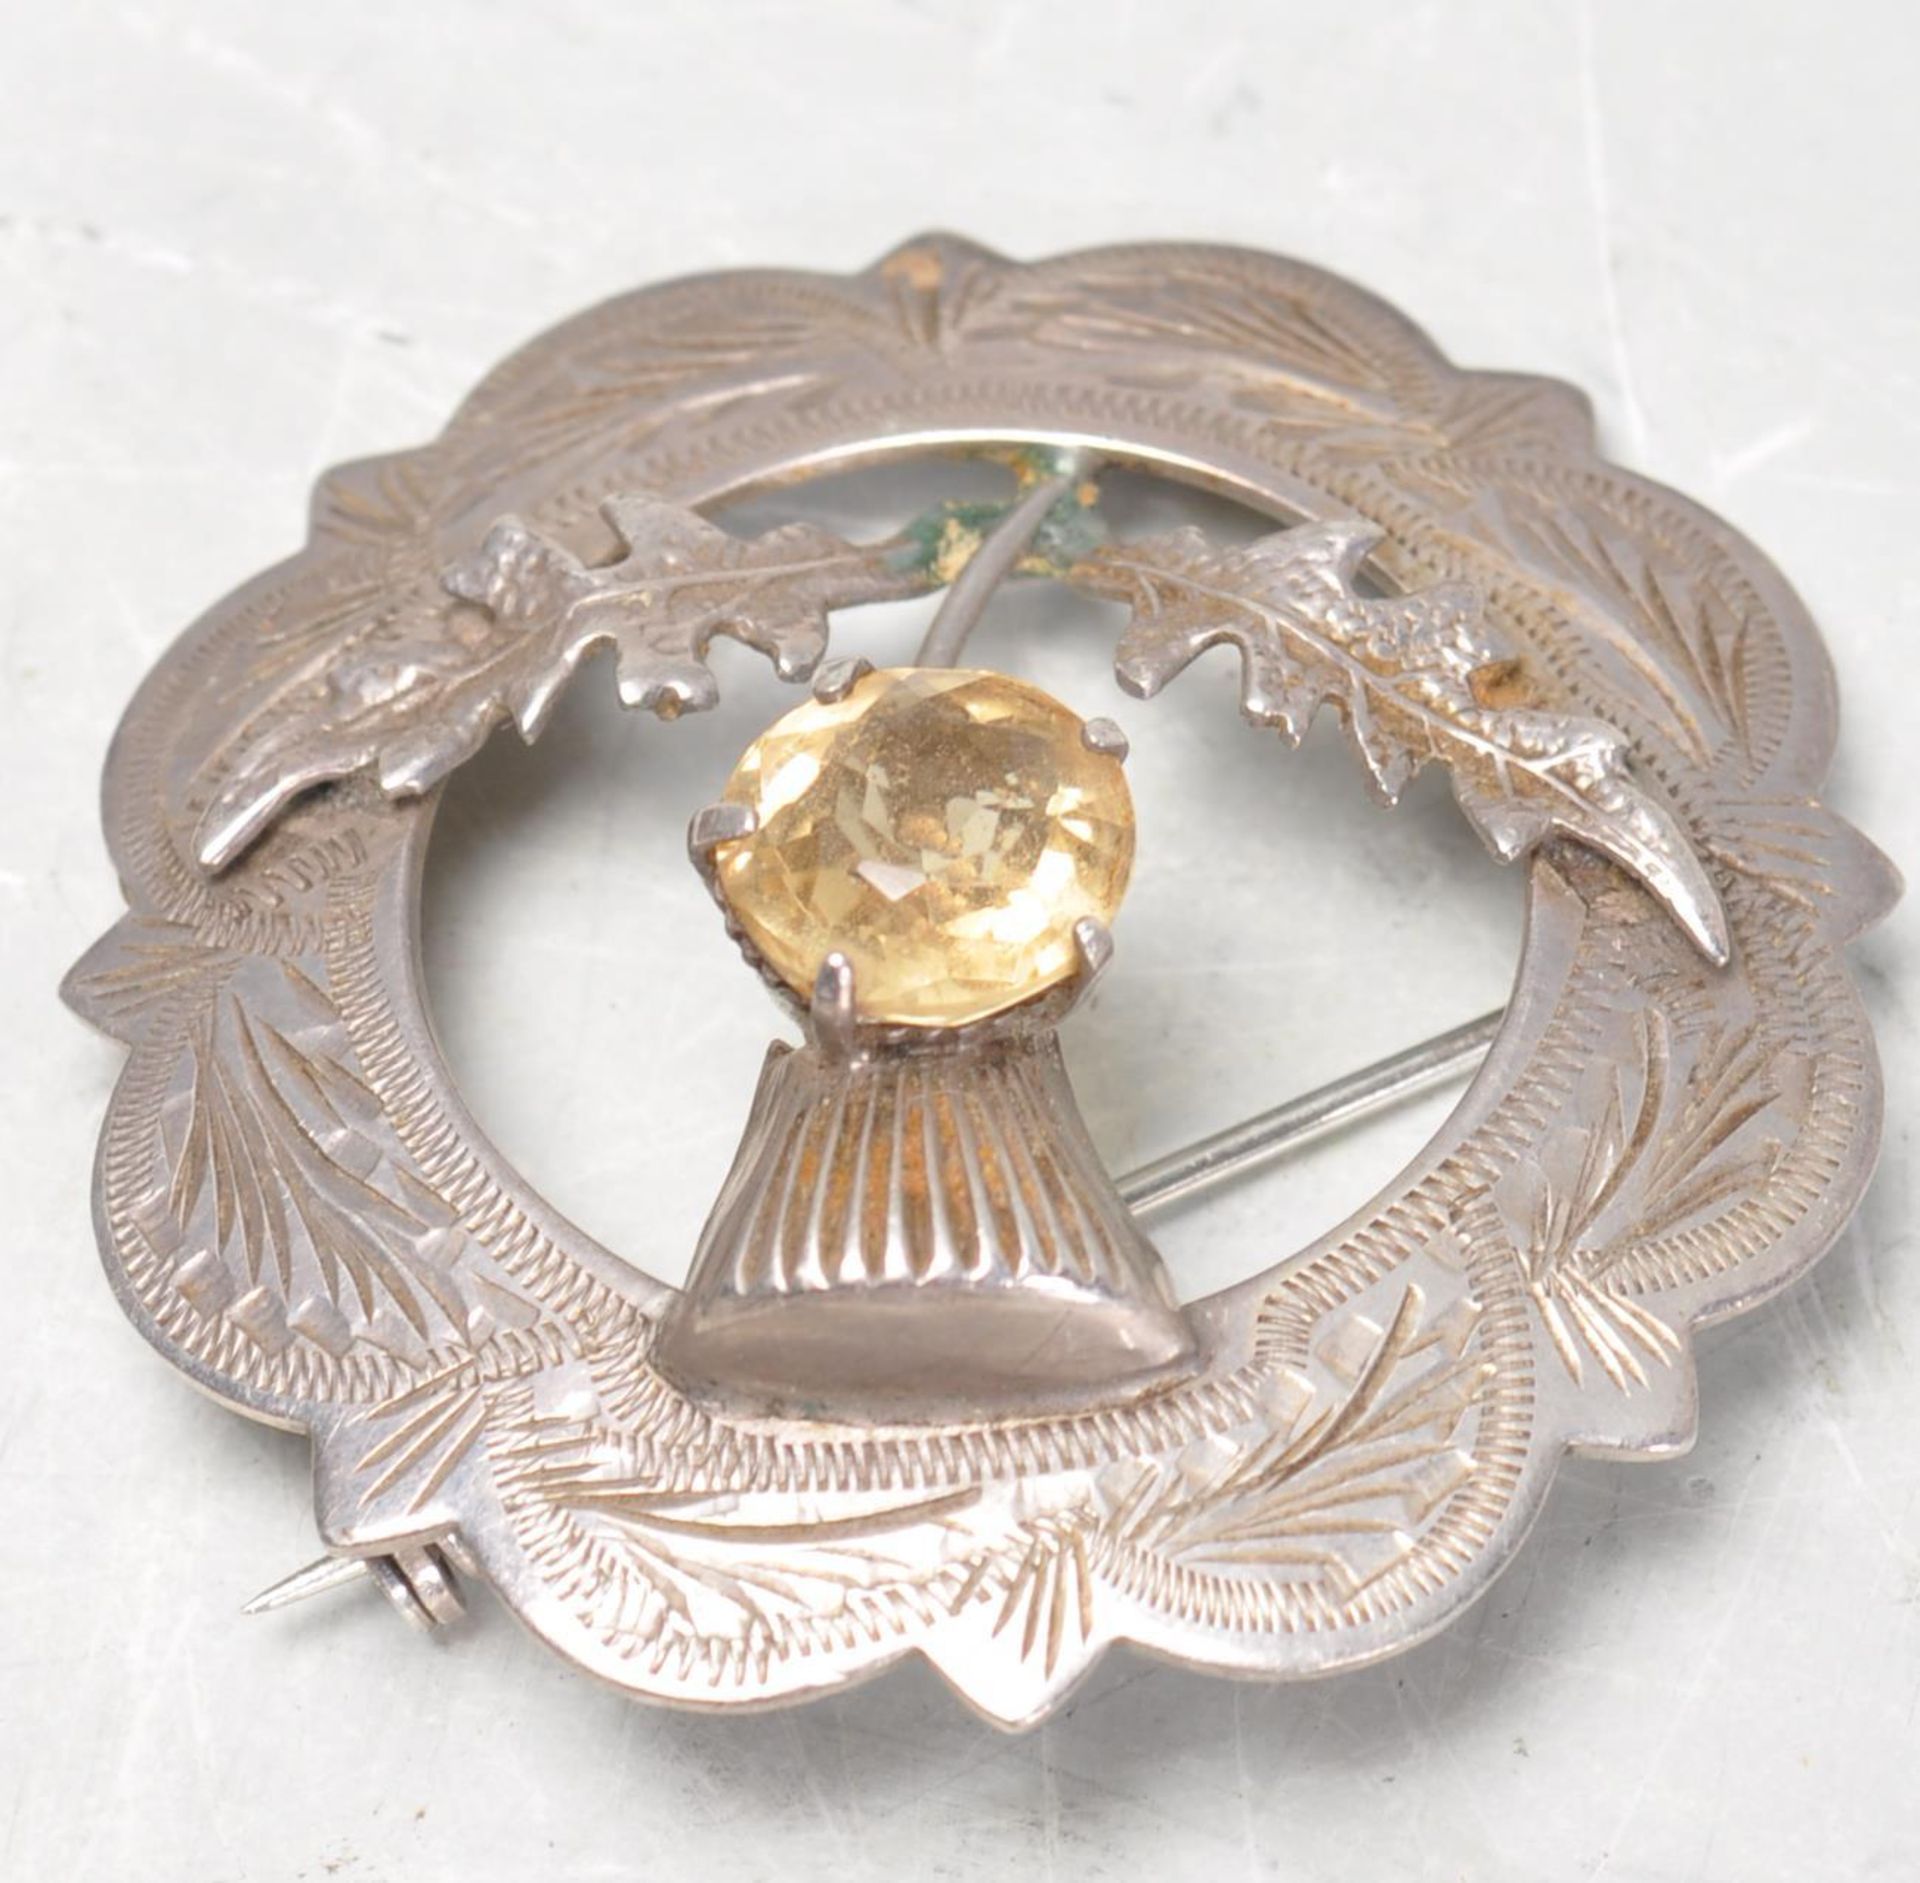 GROUP OF VINTAGE SILVER JEWELLERY AND ACCESSORIES - Image 5 of 7